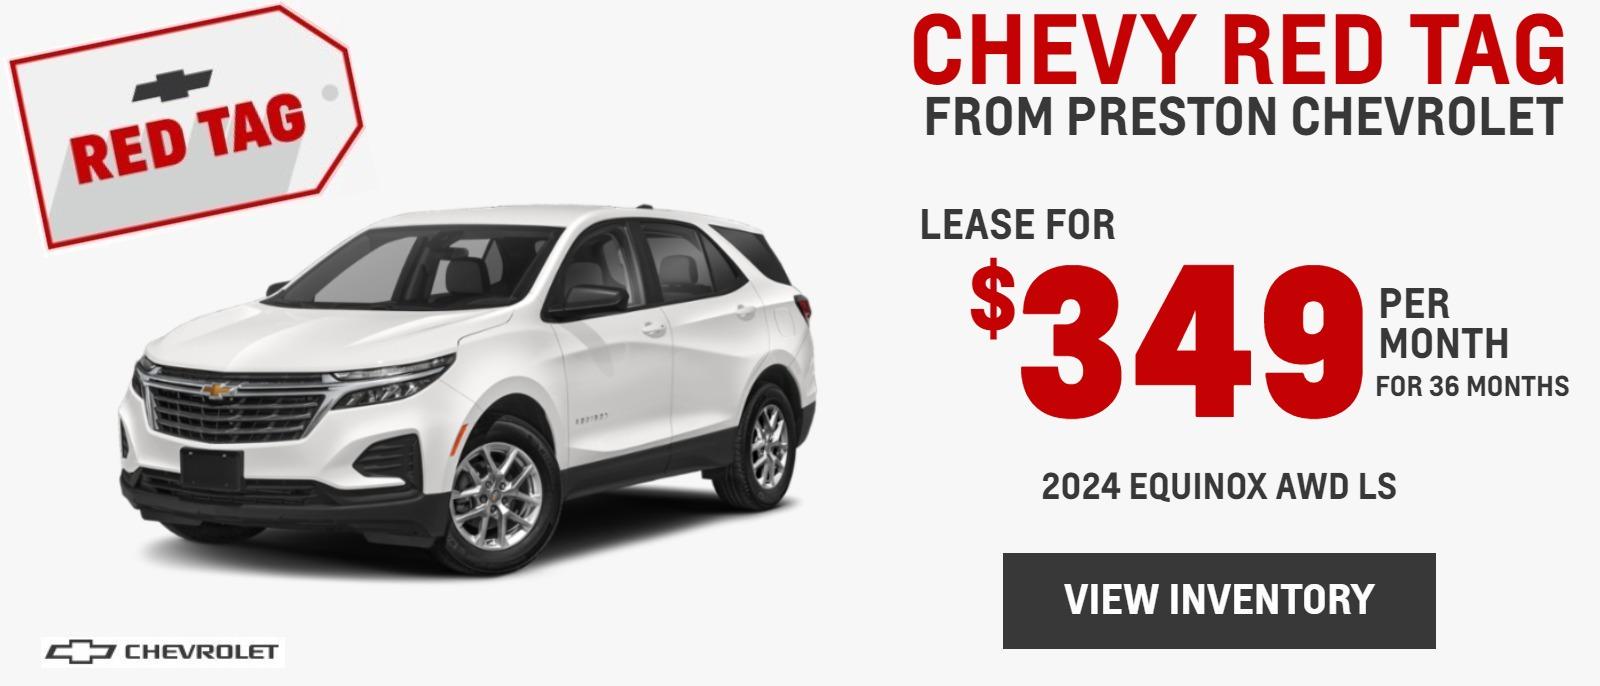 (240239) LEASE A 2024 EQUINOX AWD LS FOR $349 PER MONTH FROM PRESTON CHEVROLET IN BURTON, OH